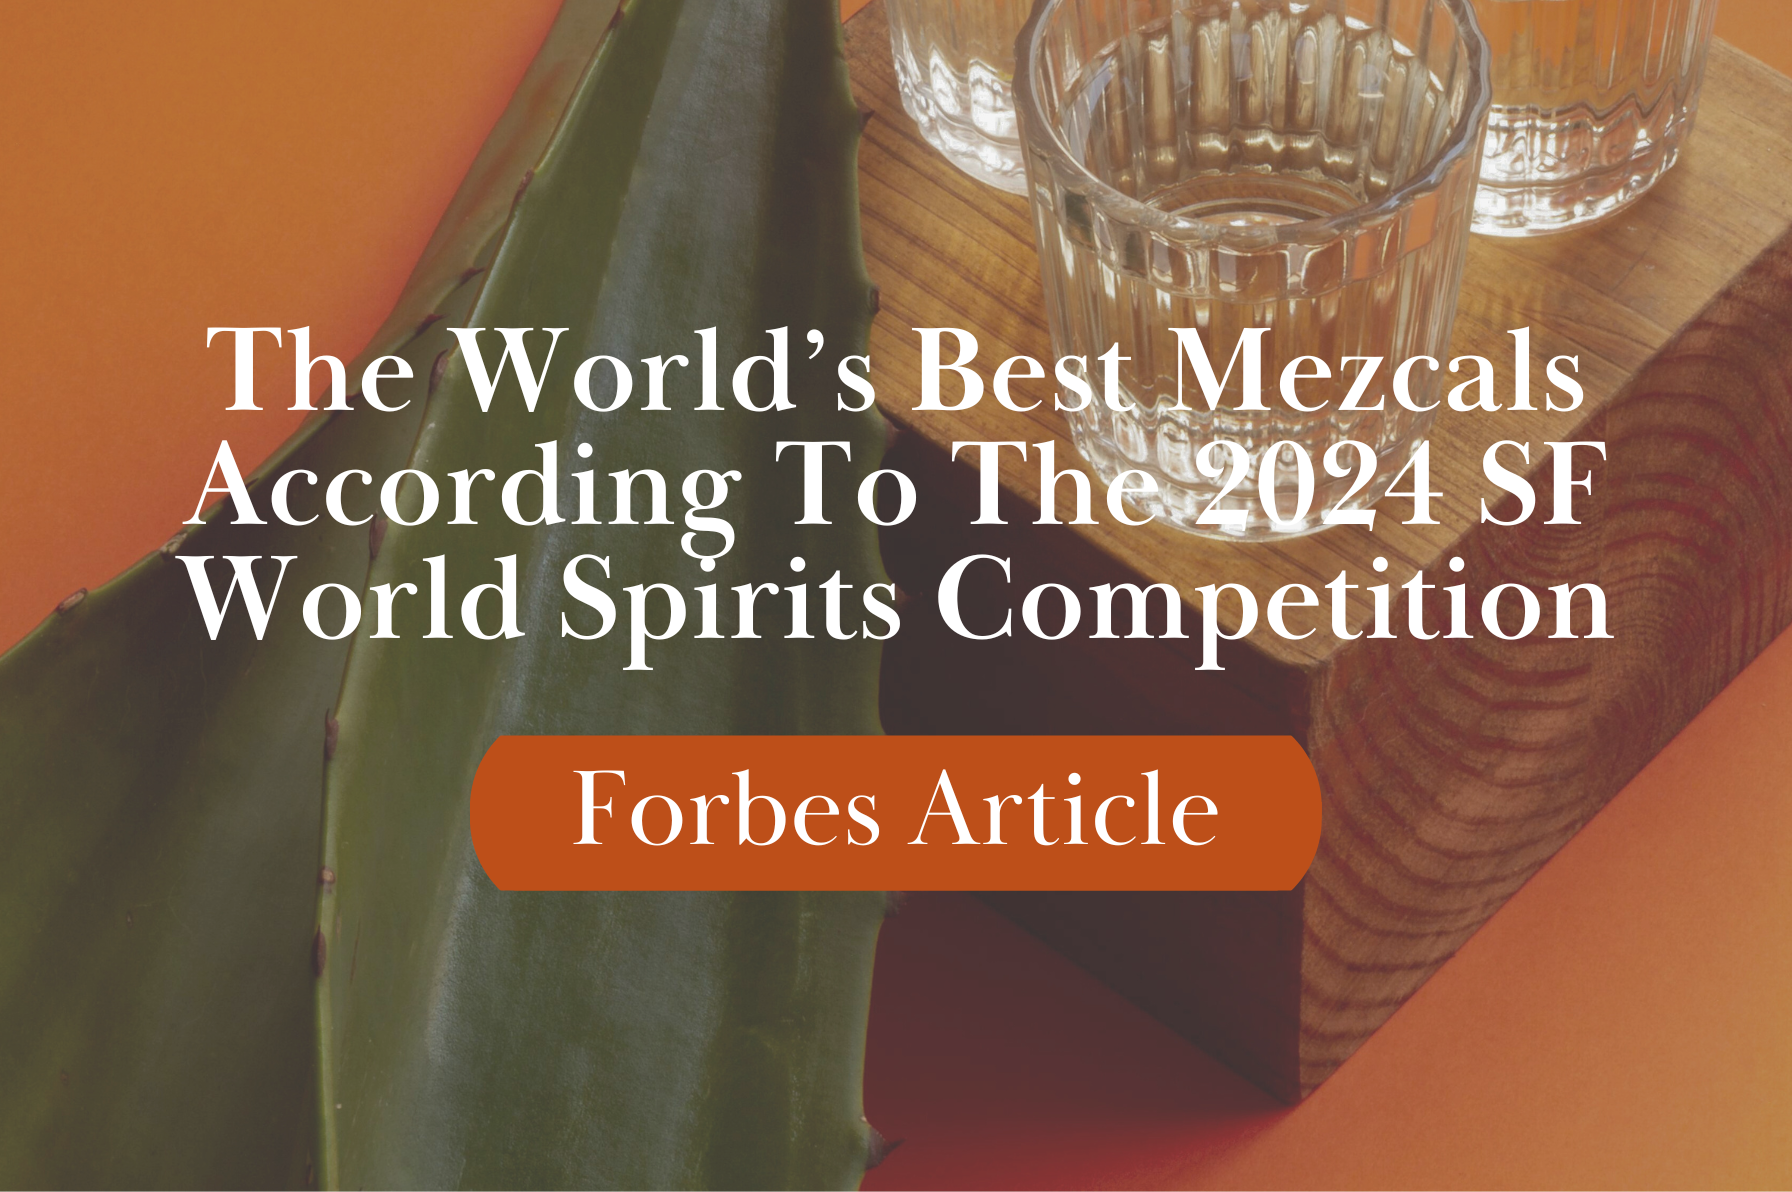 The World’s Best Mezcals, According To The 2024 San Francisco World Spirits Competition